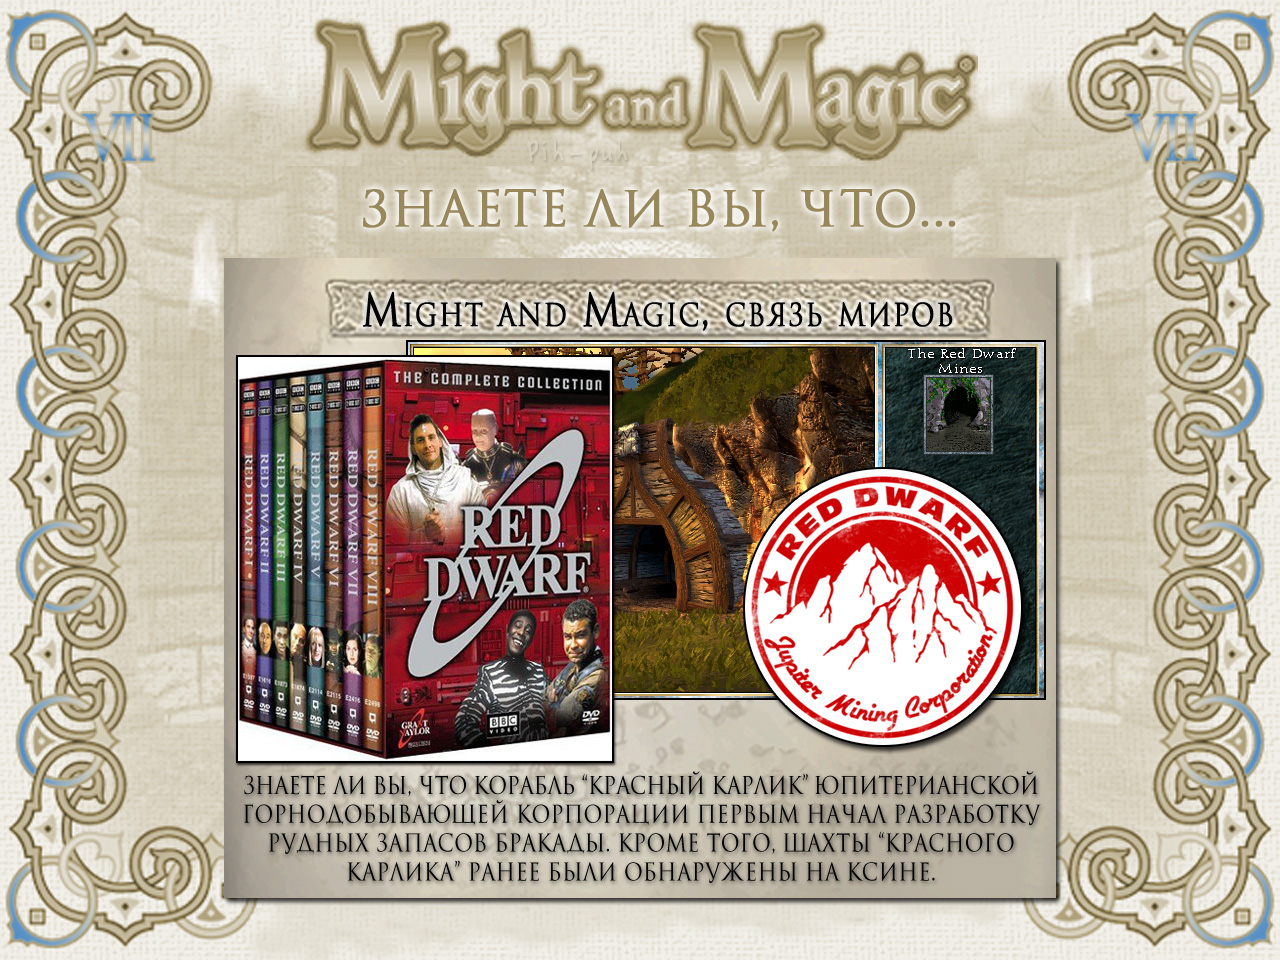 MIGHT AND MAGIC VII ( " ").